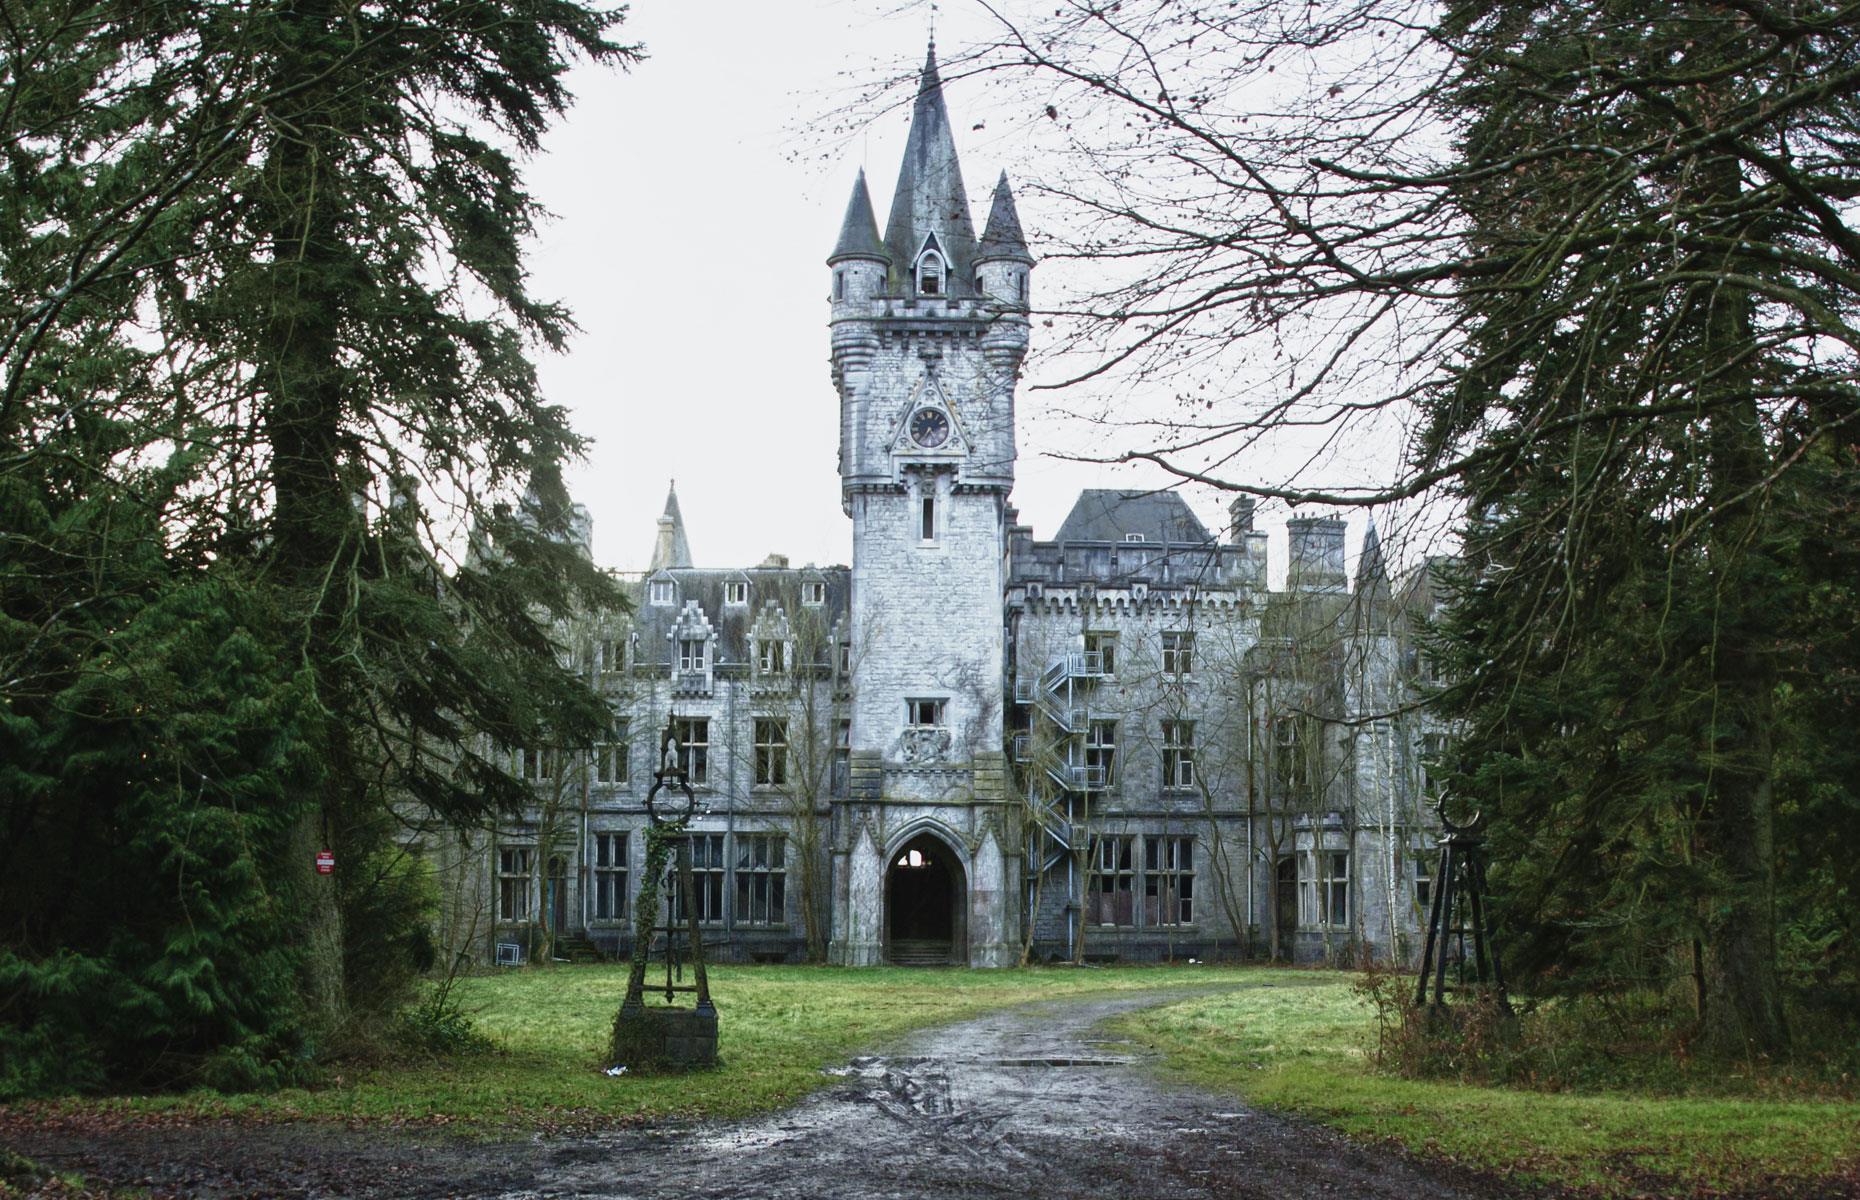 <p>Located in the village of Celles in Belgium, Chateau Miranda was designed in 1866 by English architect Edward Milner for the Liedekerke-Beaufort family. In the Second World War it was taken over by Nazi forces, then used as an orphanage, followed by a holiday camp. With its Gothic looks, this <a href="https://www.loveproperty.com/gallerylist/85152/lynnewood-hall-the-abandoned-mansion-with-a-tragic-titanic-connection">stately home has a tragic past</a>. </p>